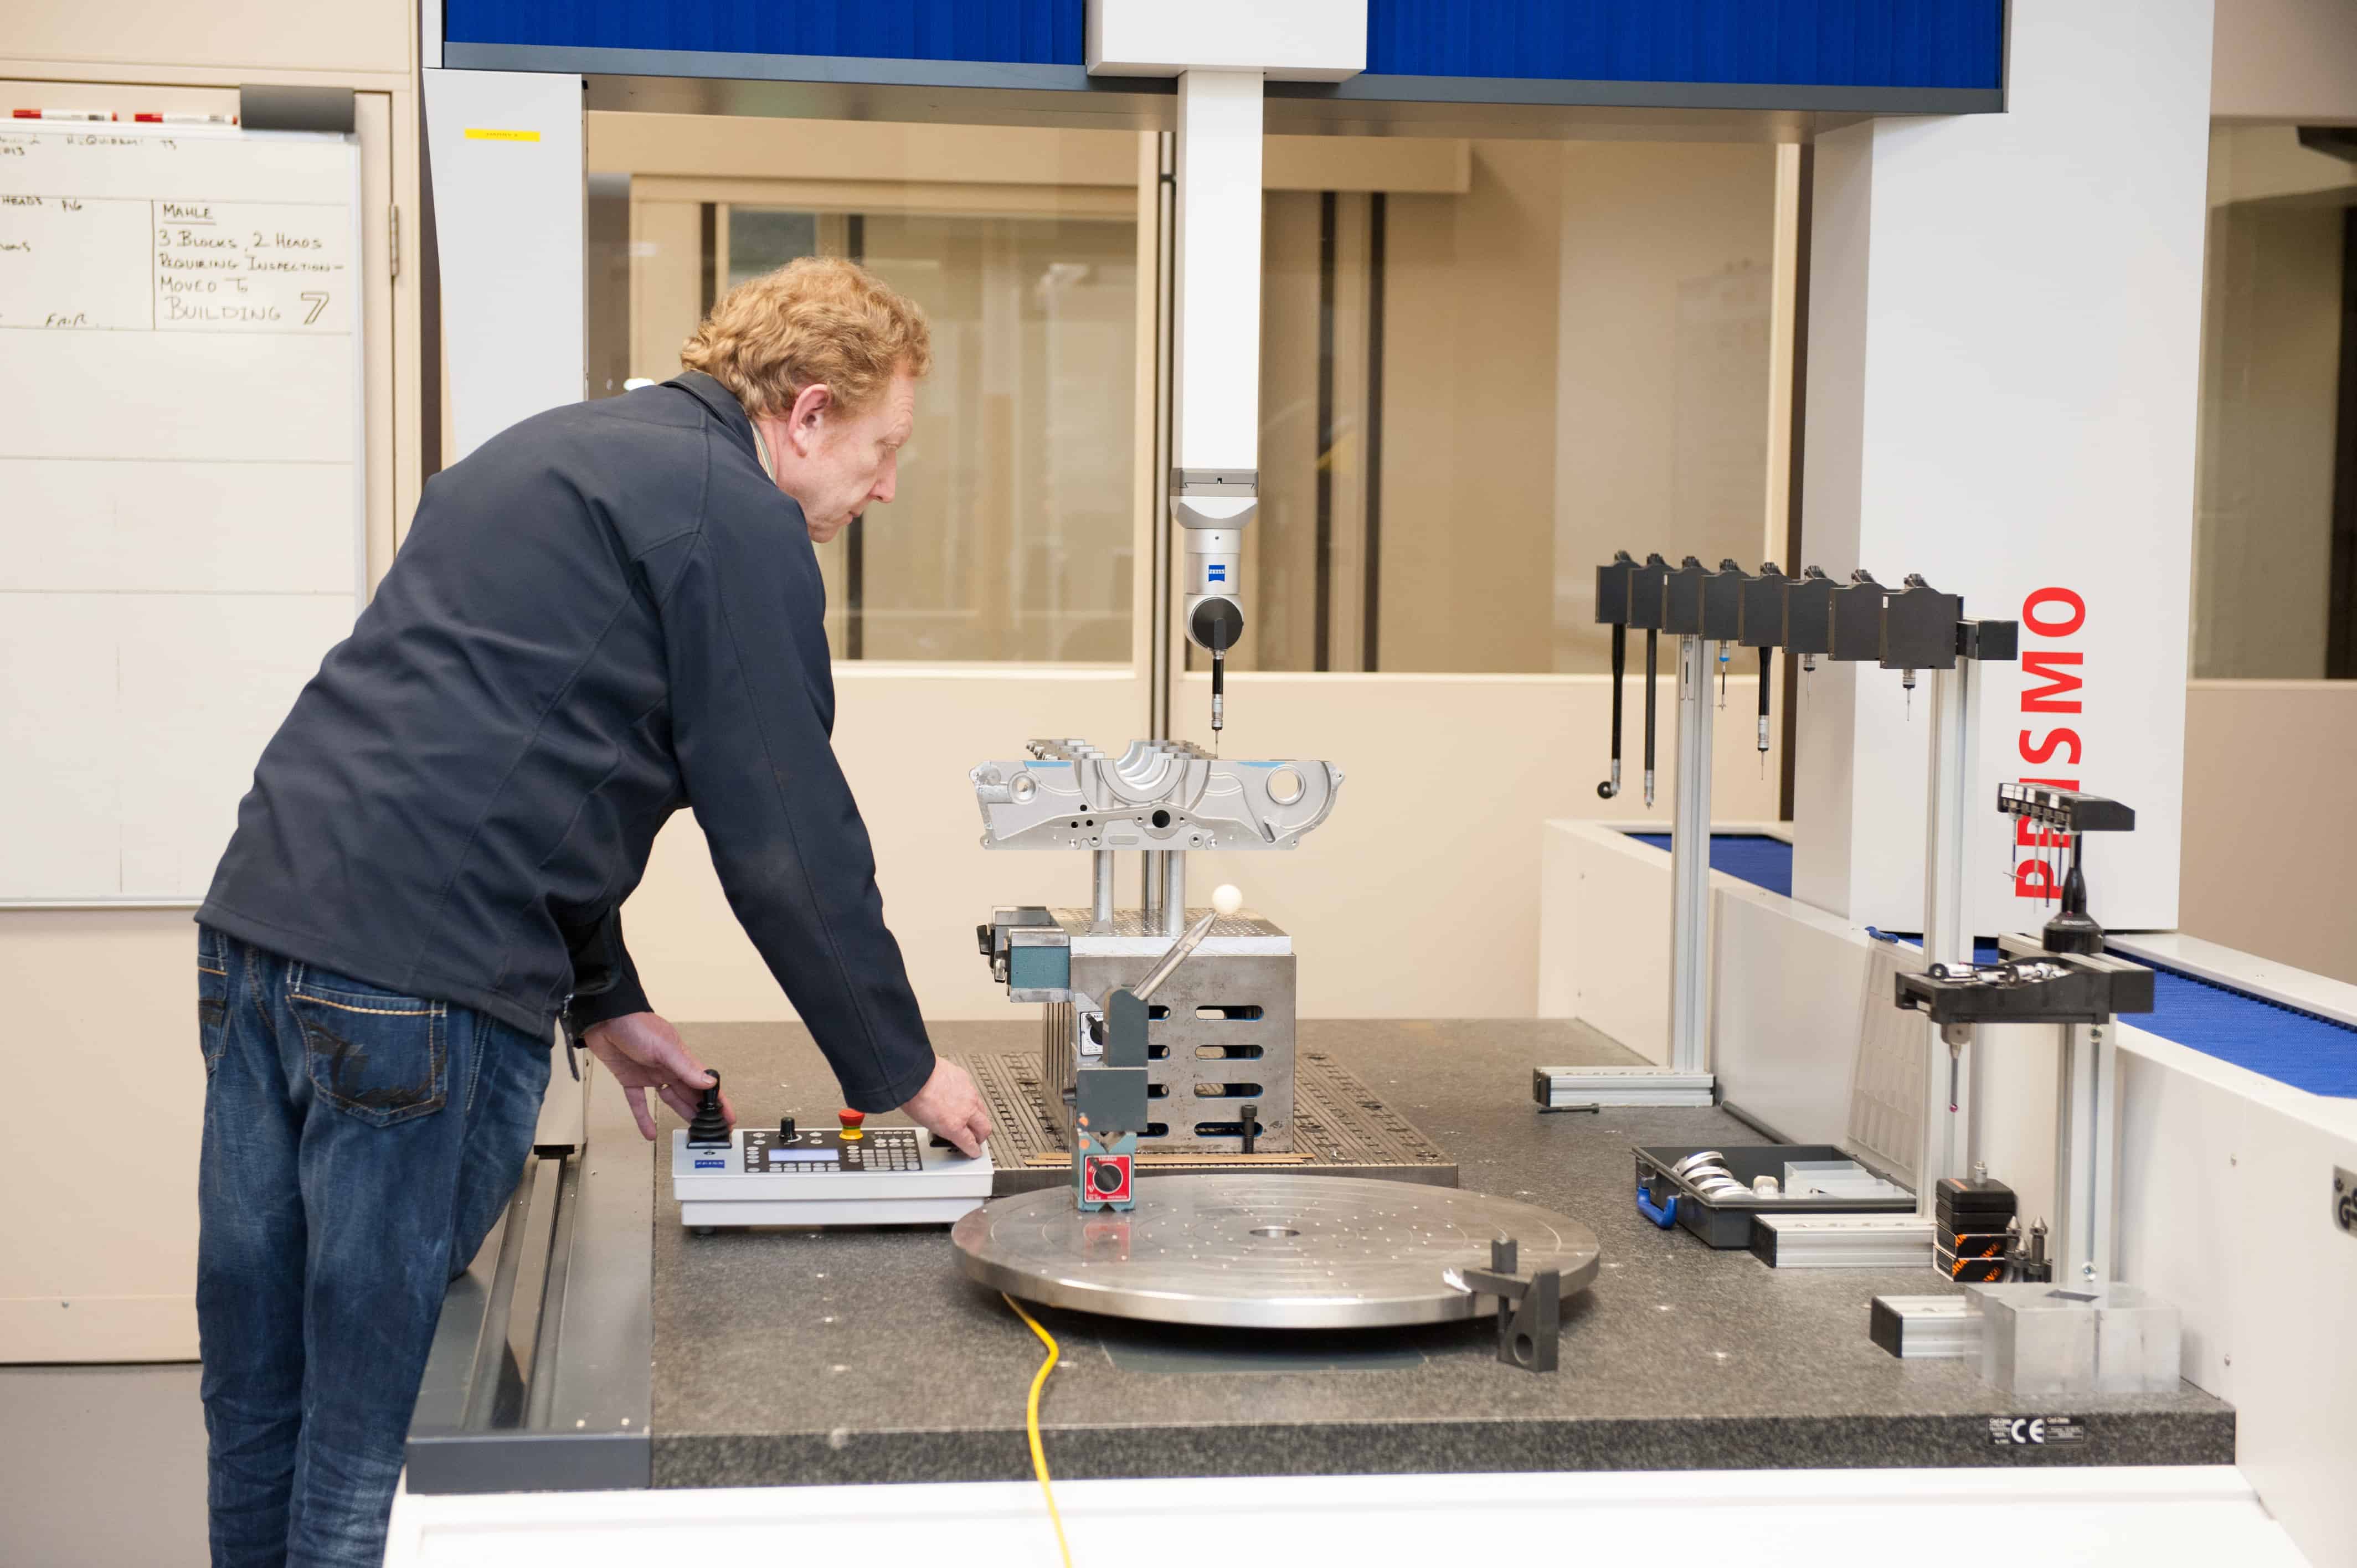 Ilmor has a well-equiped metrology suite